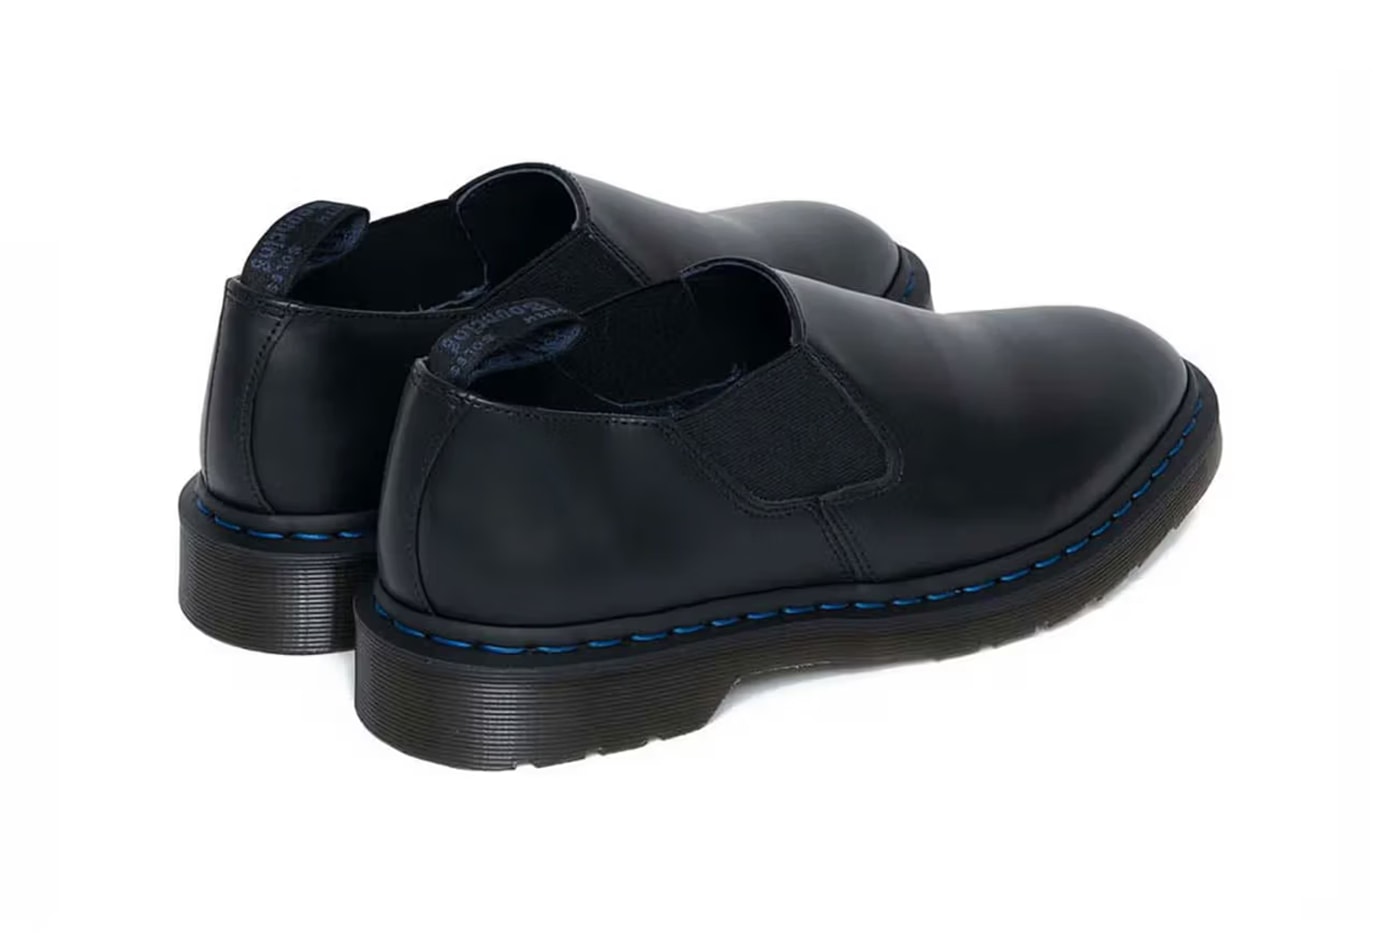 Dr. Martens & Nanamica Drop Fourth Collaboration With Sleek Boots –  Footwear News